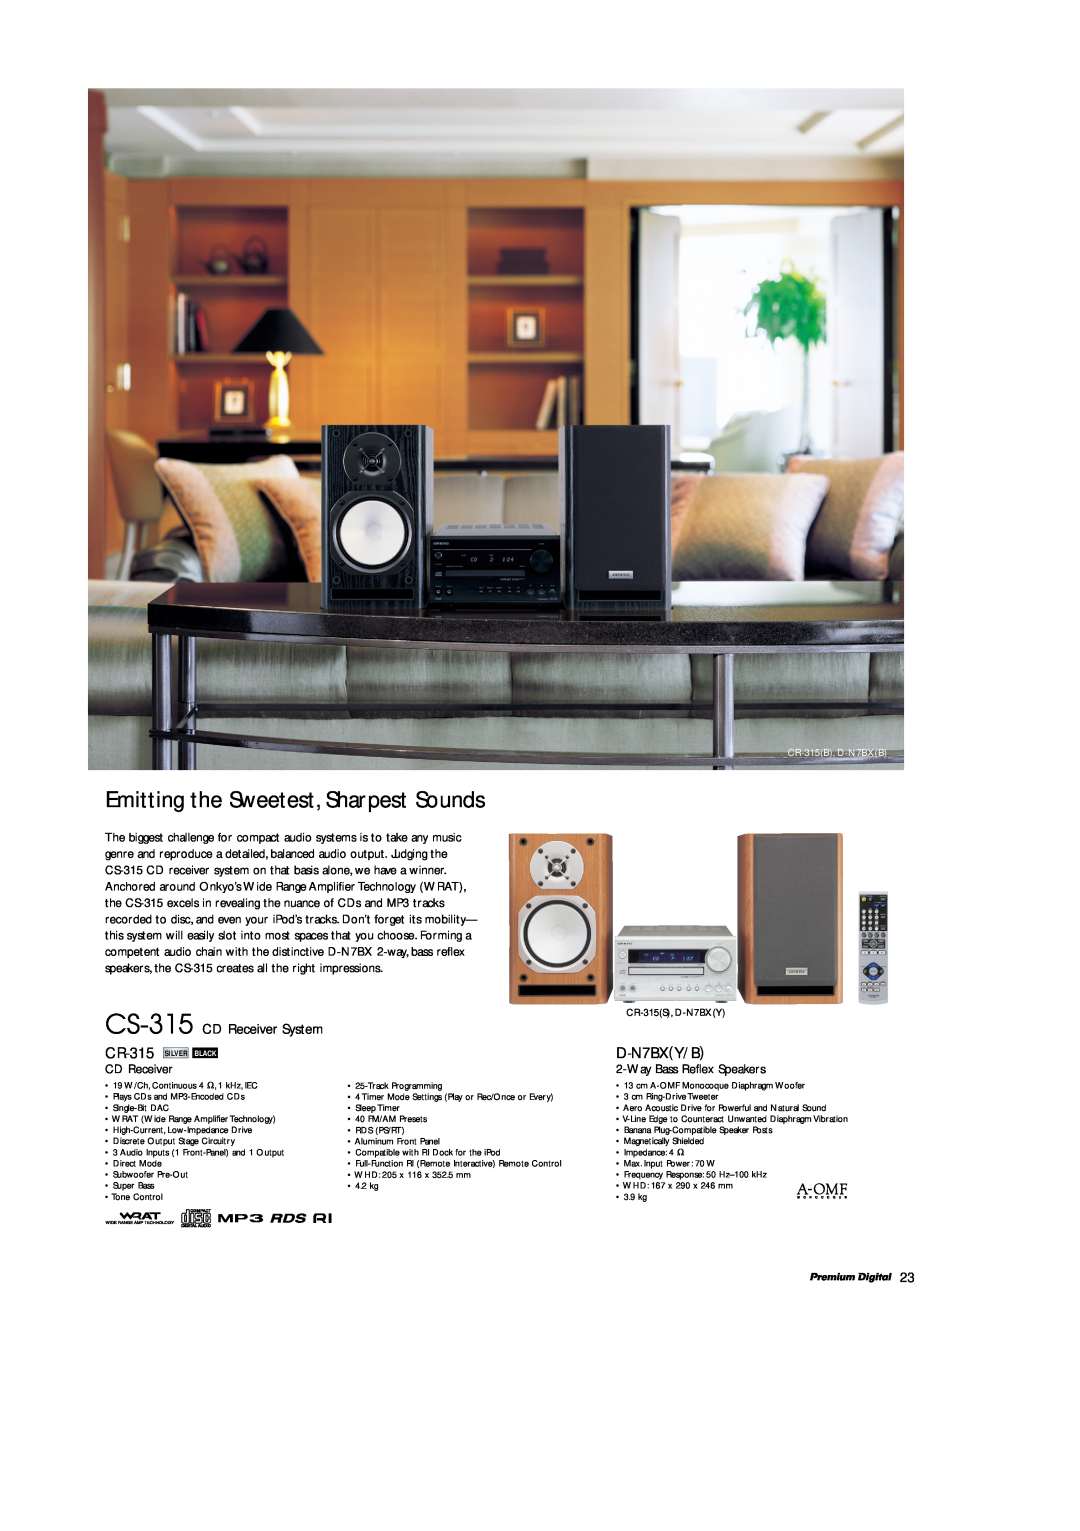 Onkyo A-9211, T-4211 Emitting the Sweetest, Sharpest Sounds, CS-315 CD Receiver System, CR-315 SILVER BLACK, D-N7BXY/B 